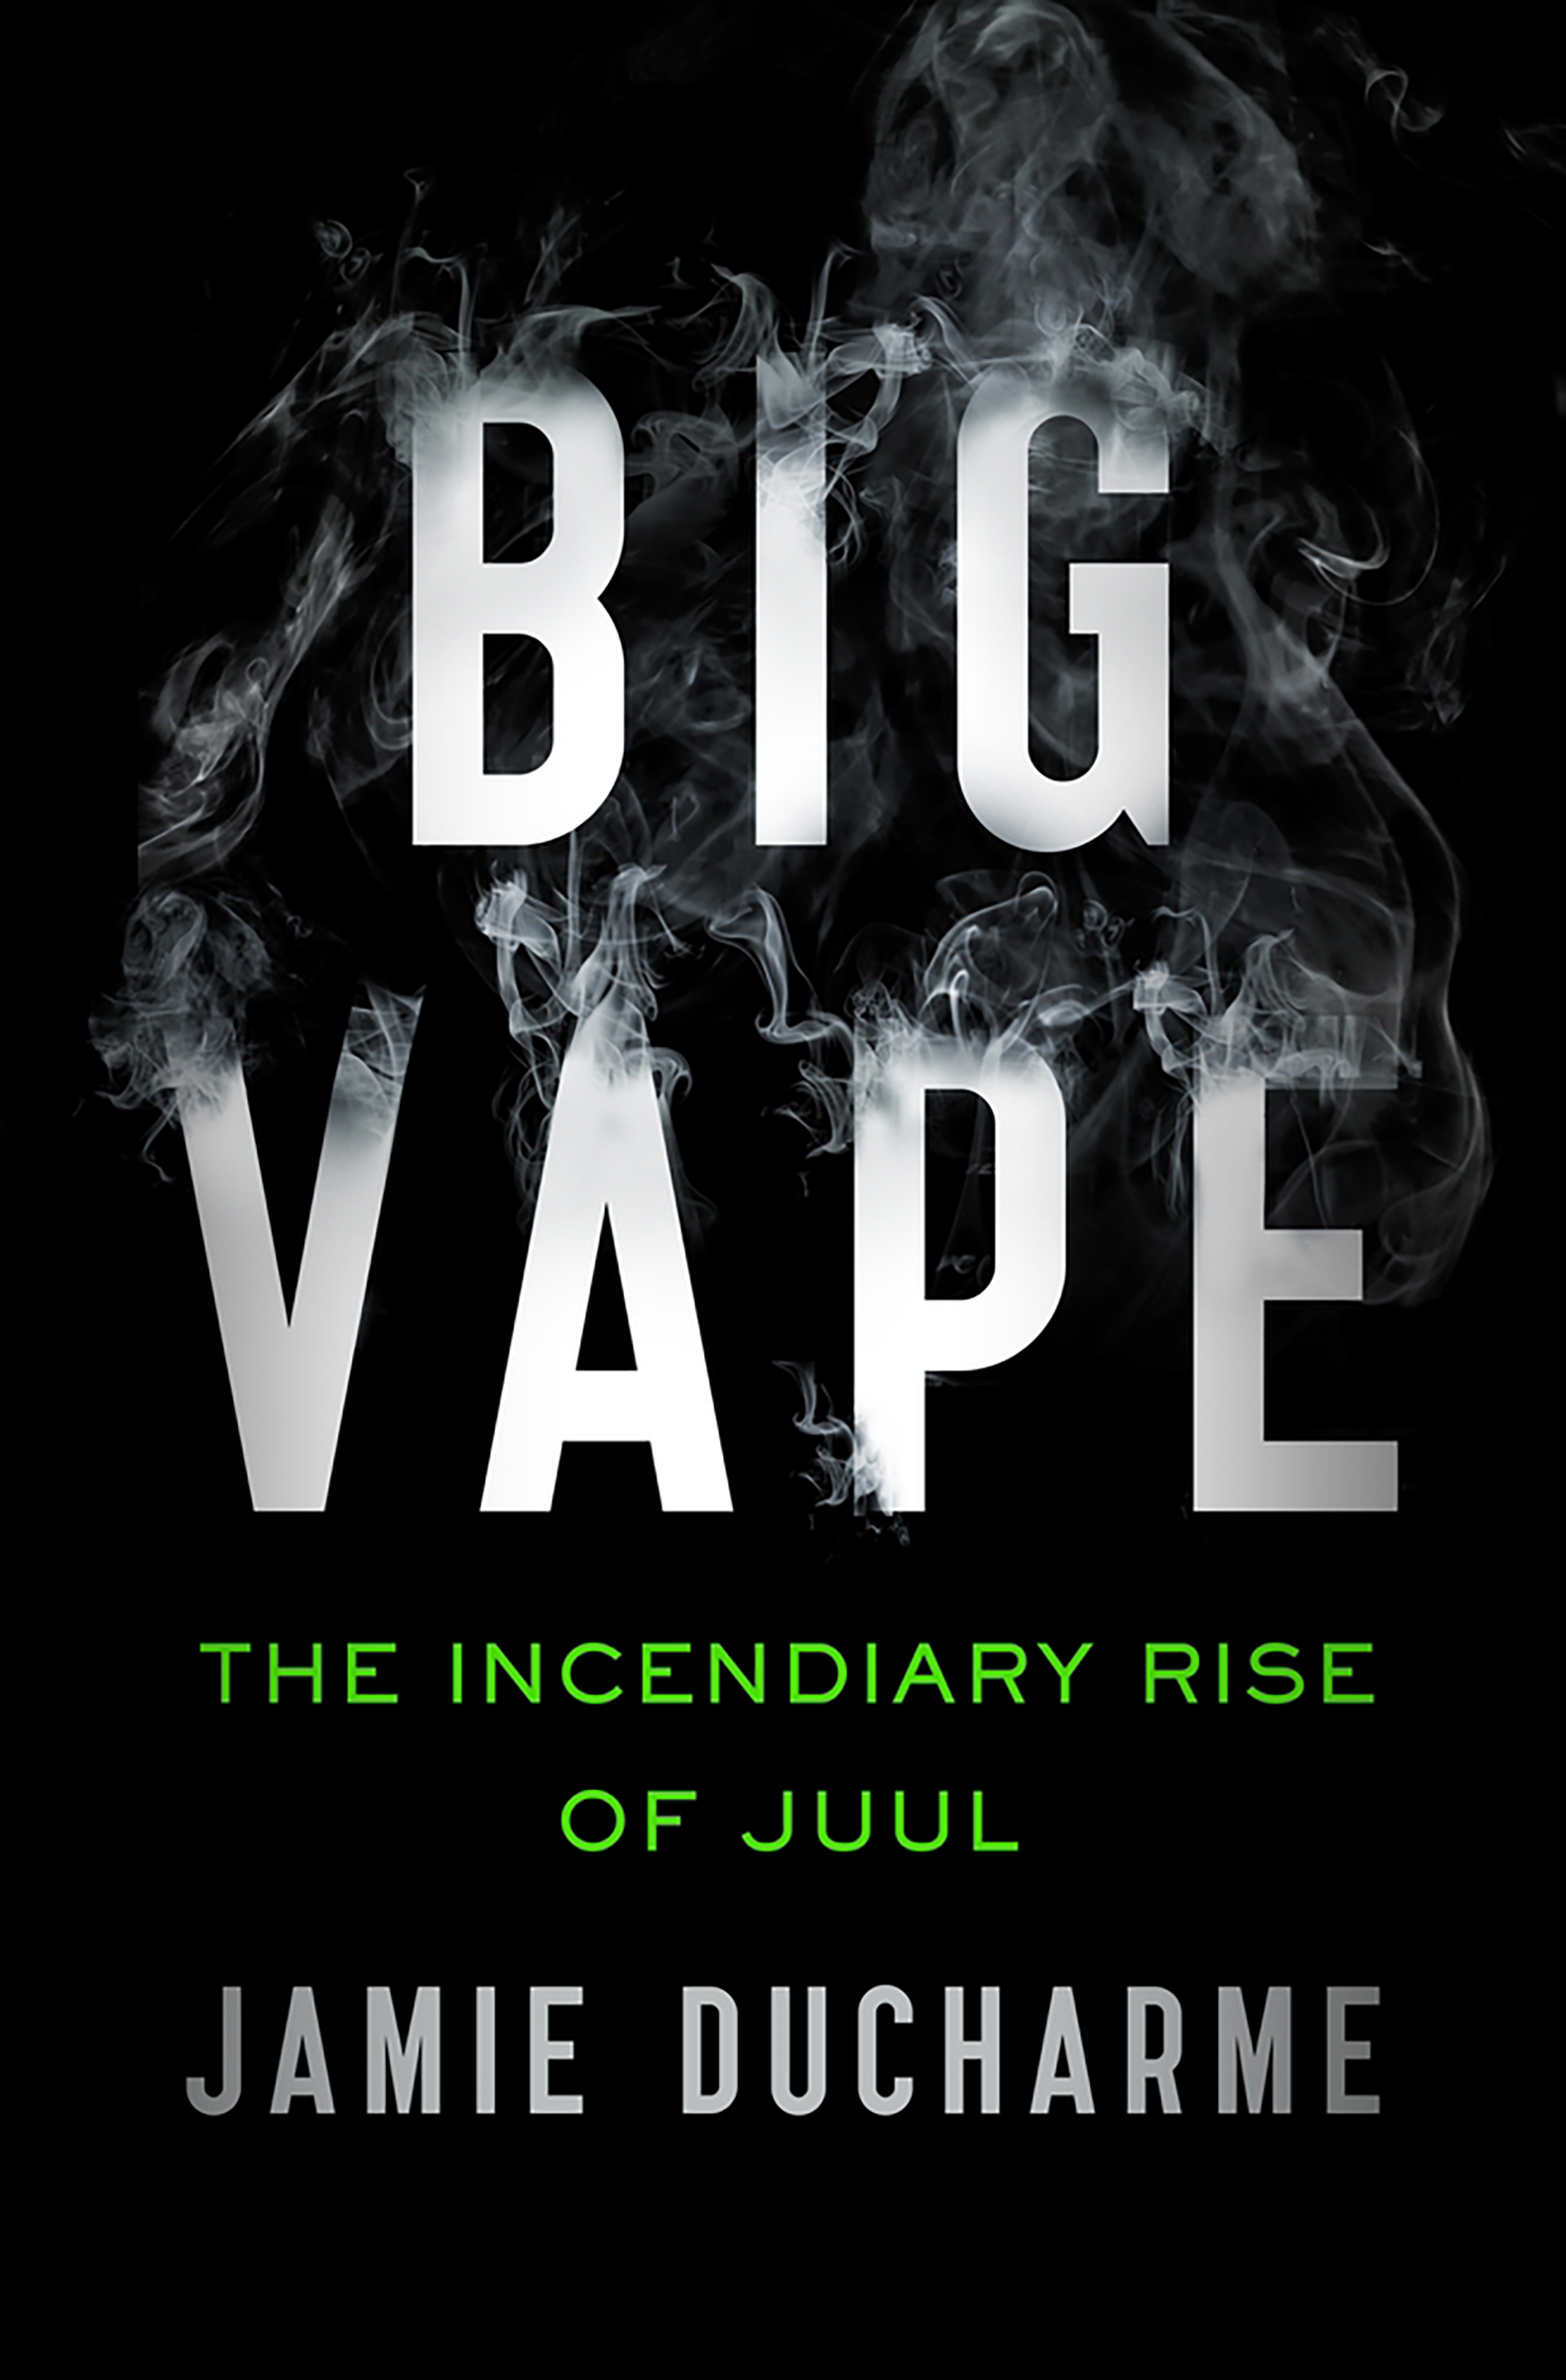 Ducharme’s book, <em>Big Vape: The Incendiary Rise of Juul</em>, out May 25